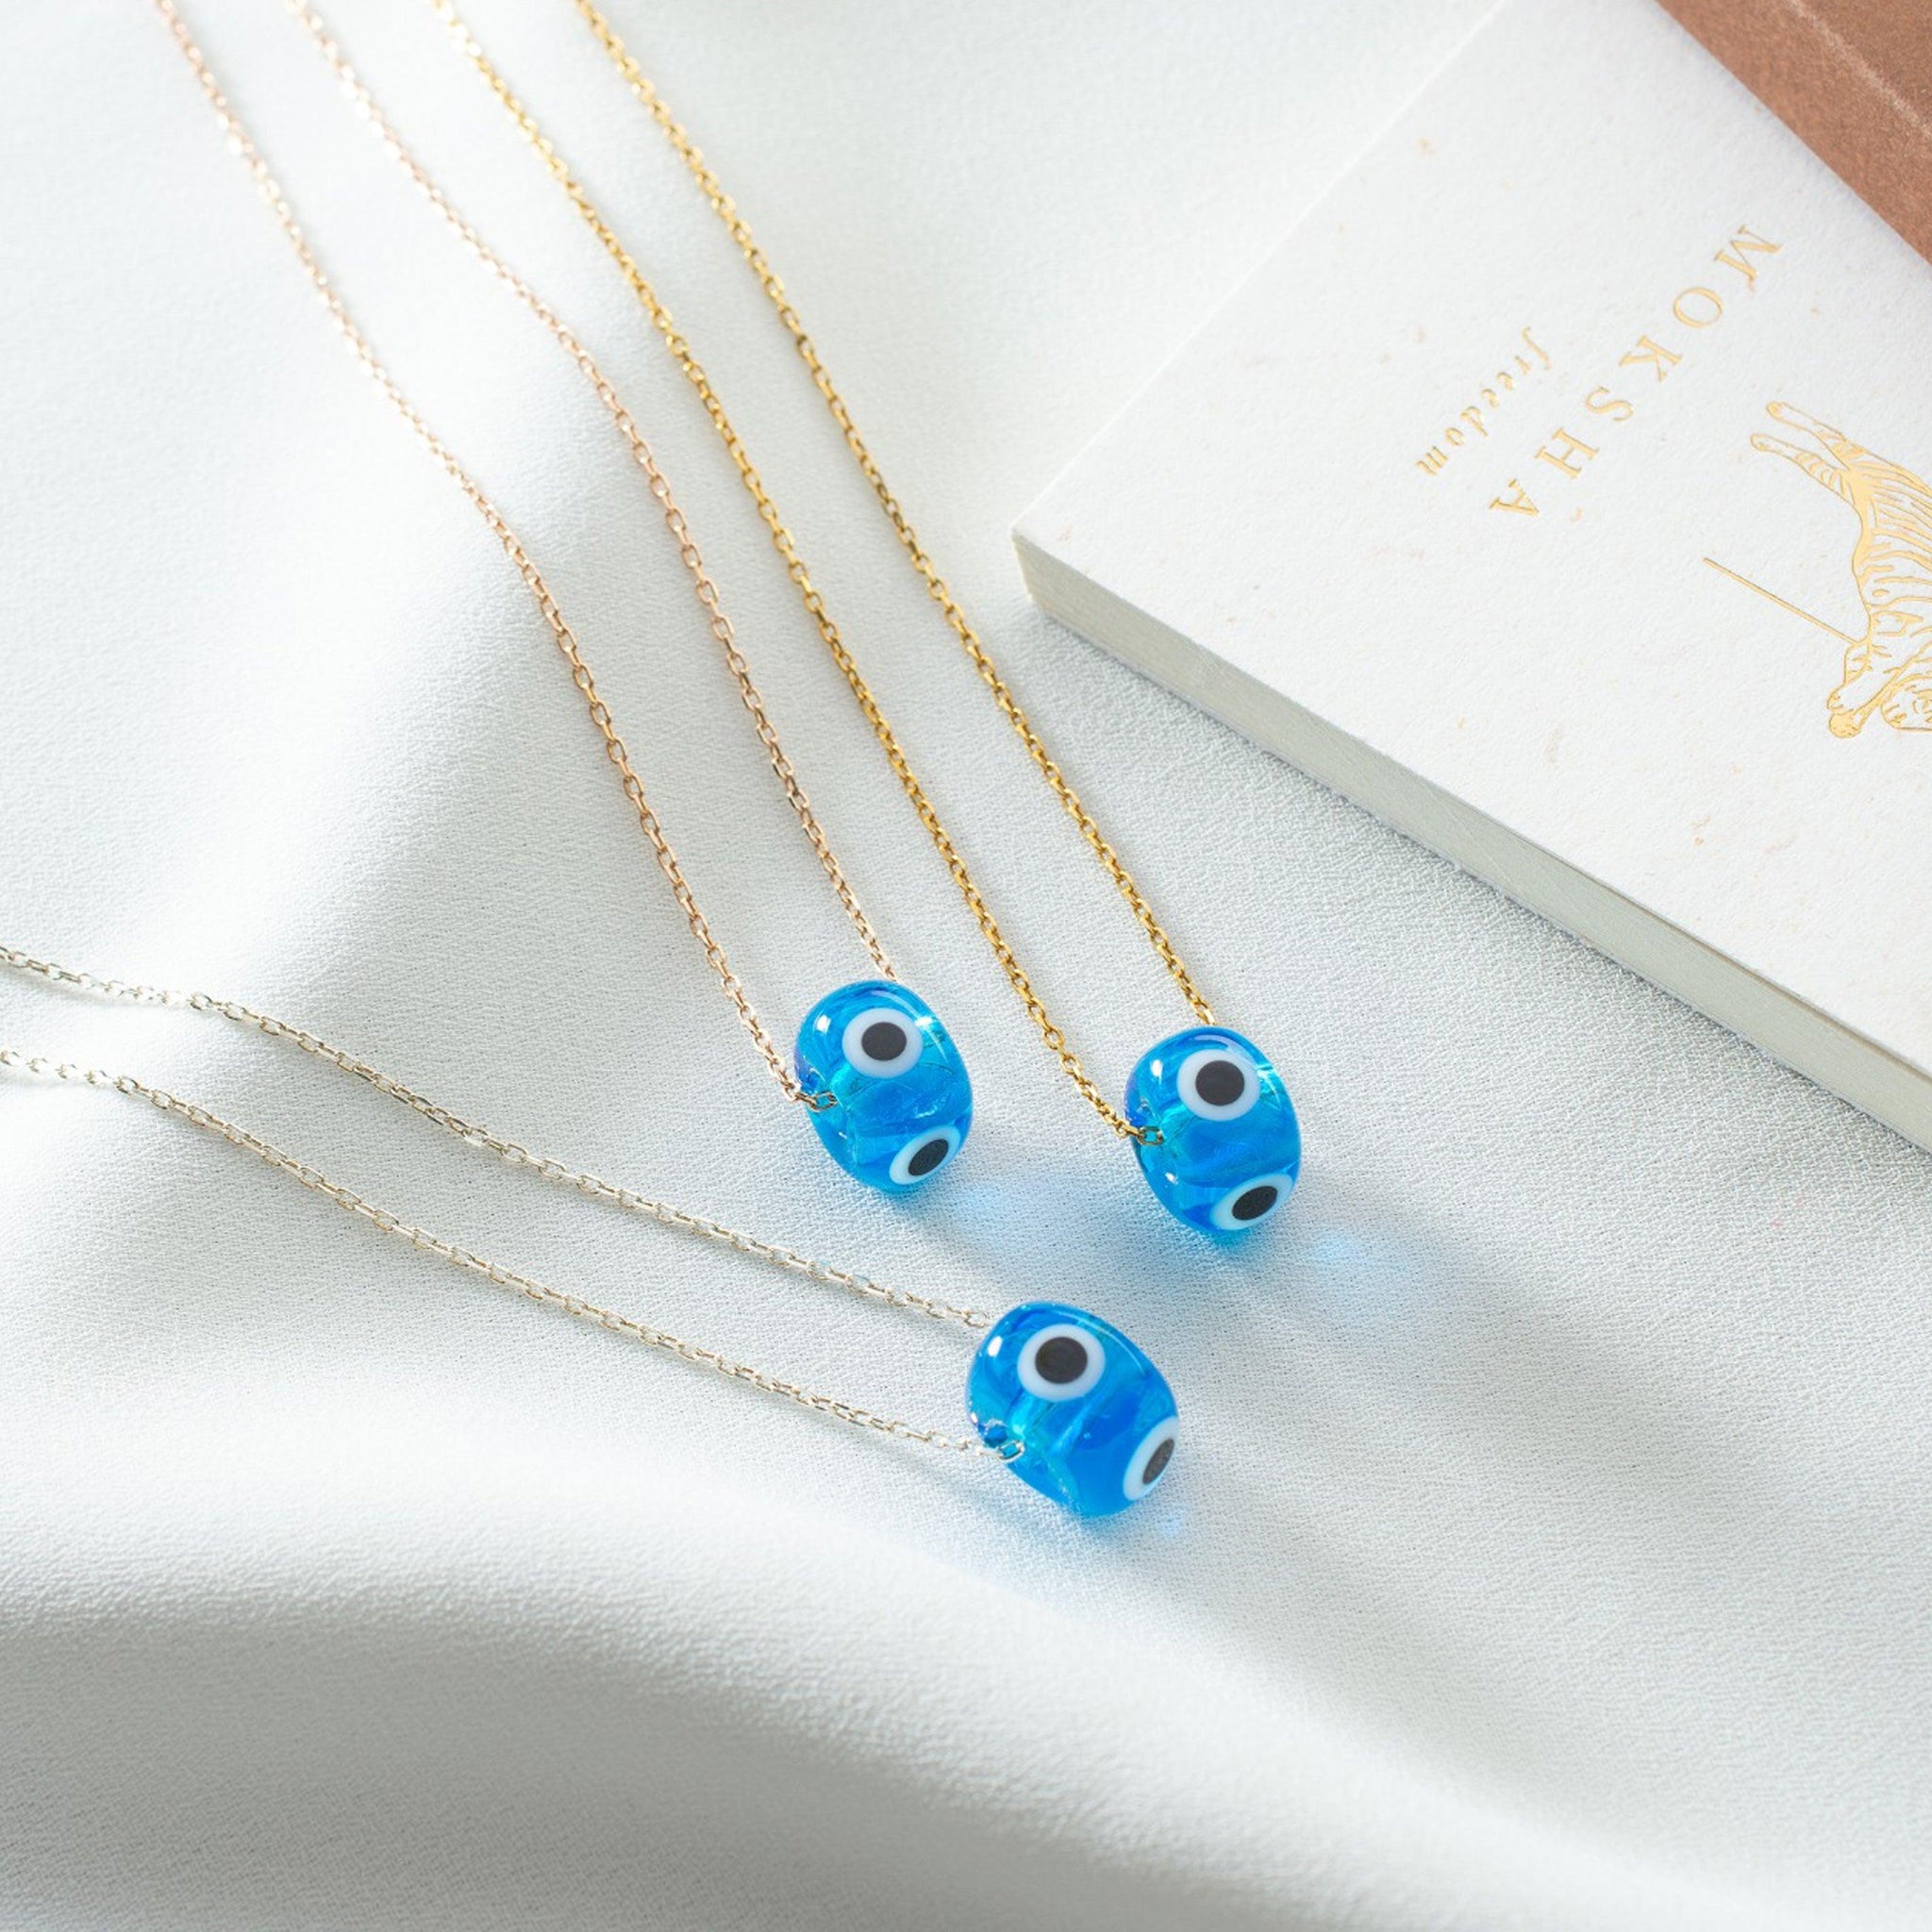 Evil Eye Necklace Gold • Evil Eye Necklace Canada • Gift For Mom - Trending Silver Gifts